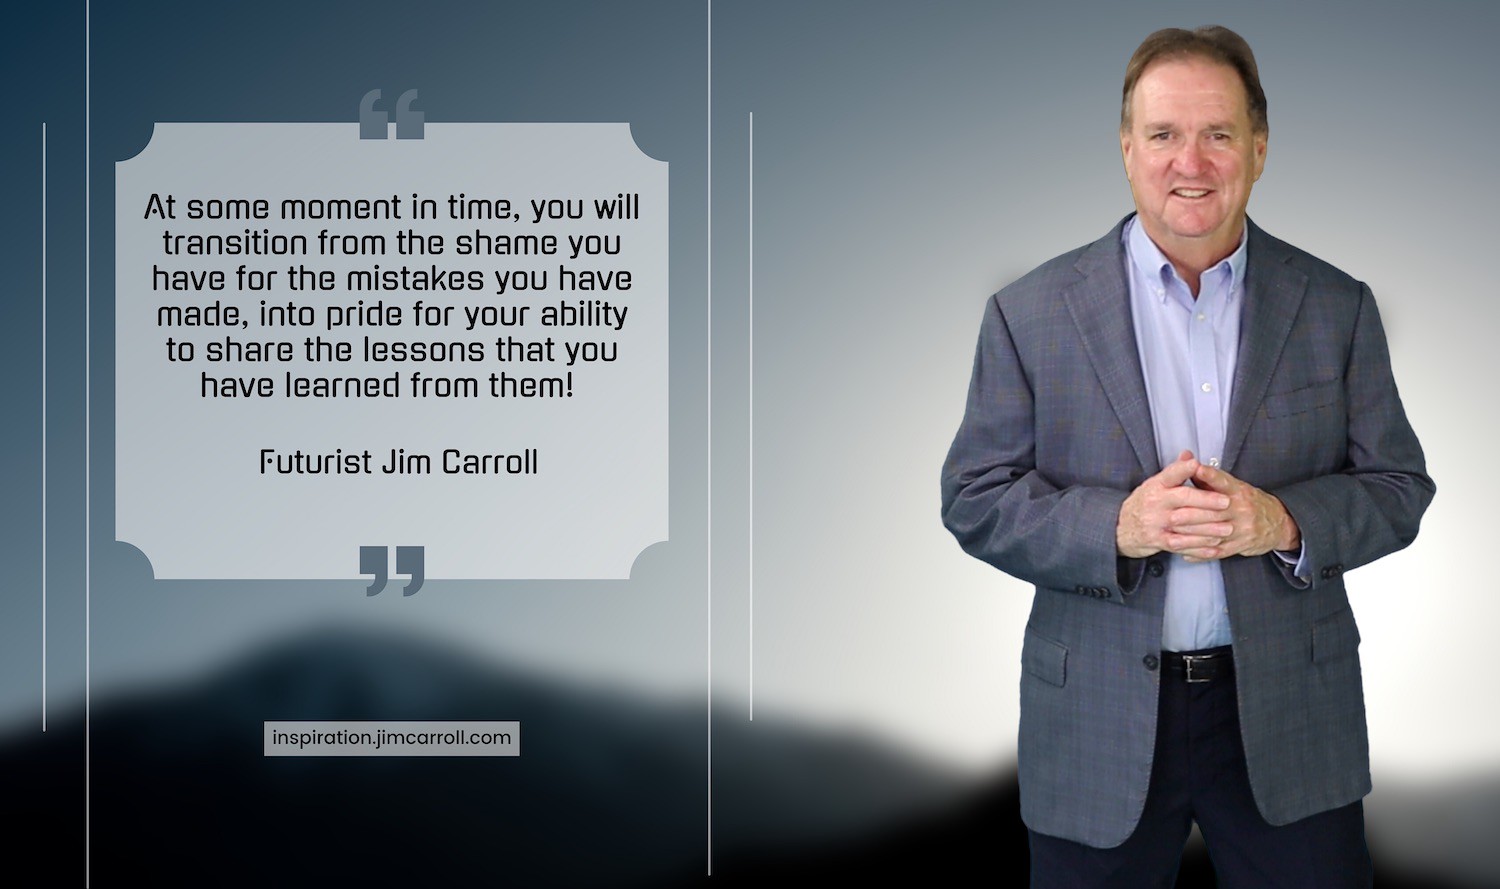 "At some moment in time, you will transition from the shame of your mistakes into pride for the lessons you've learned from them!" - Futurist Jim Carroll